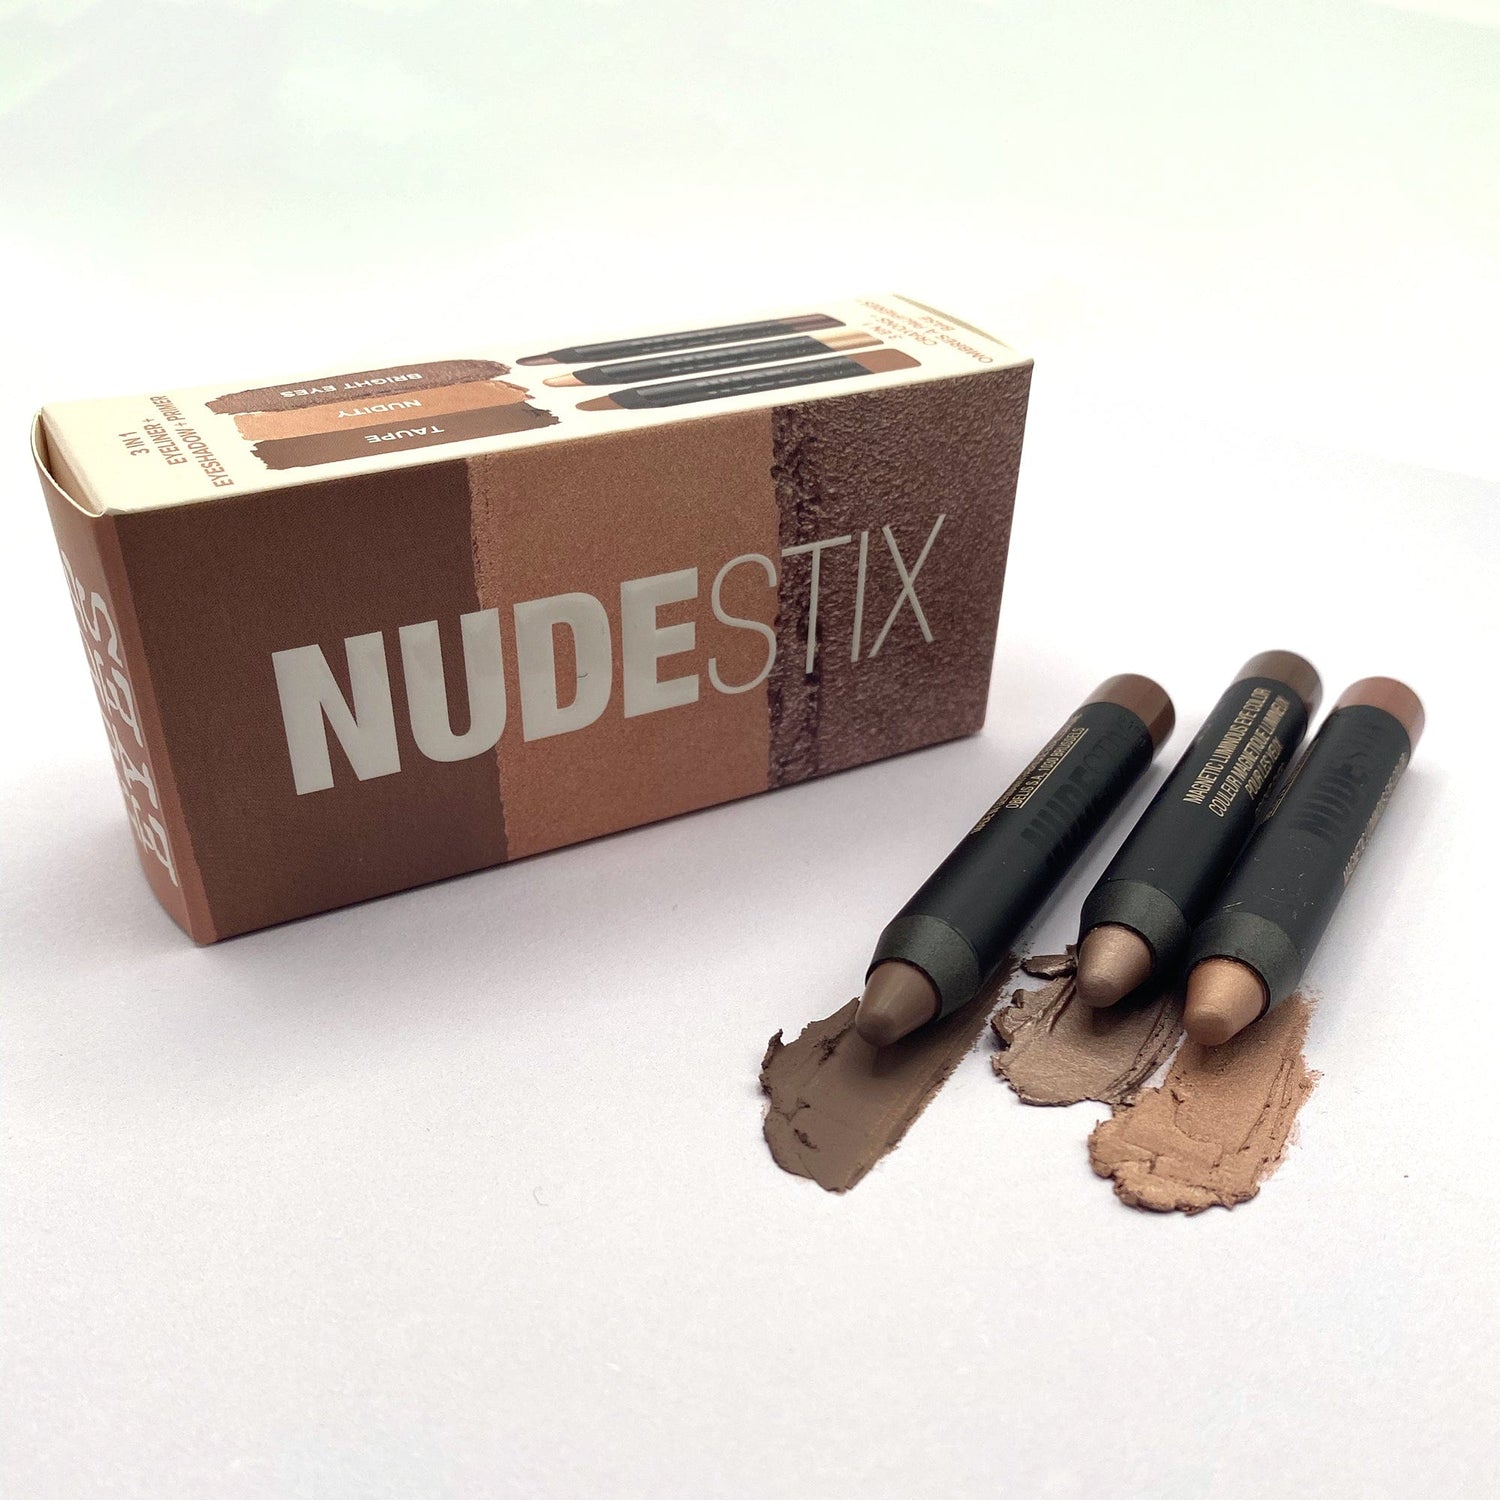 Eyeshadow pencils in Bright Nude Eyes Mini Kit and swatches